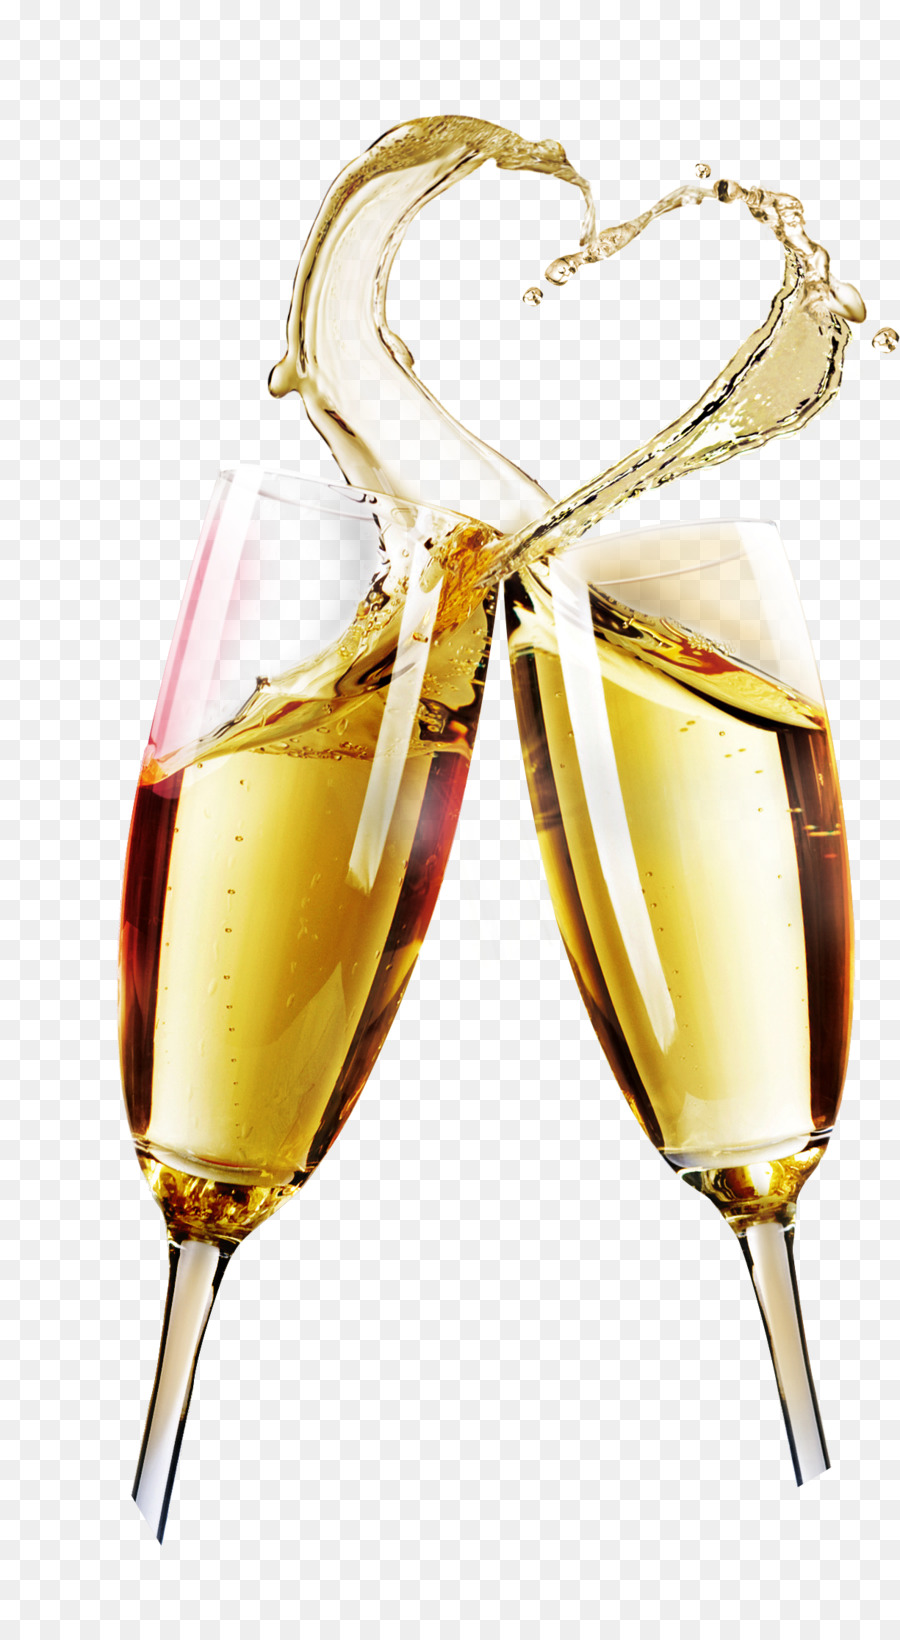 Champagne glass Wine glass Cup - Champagne png download - 1225*2221 - Free Transparent Champagne png Download.